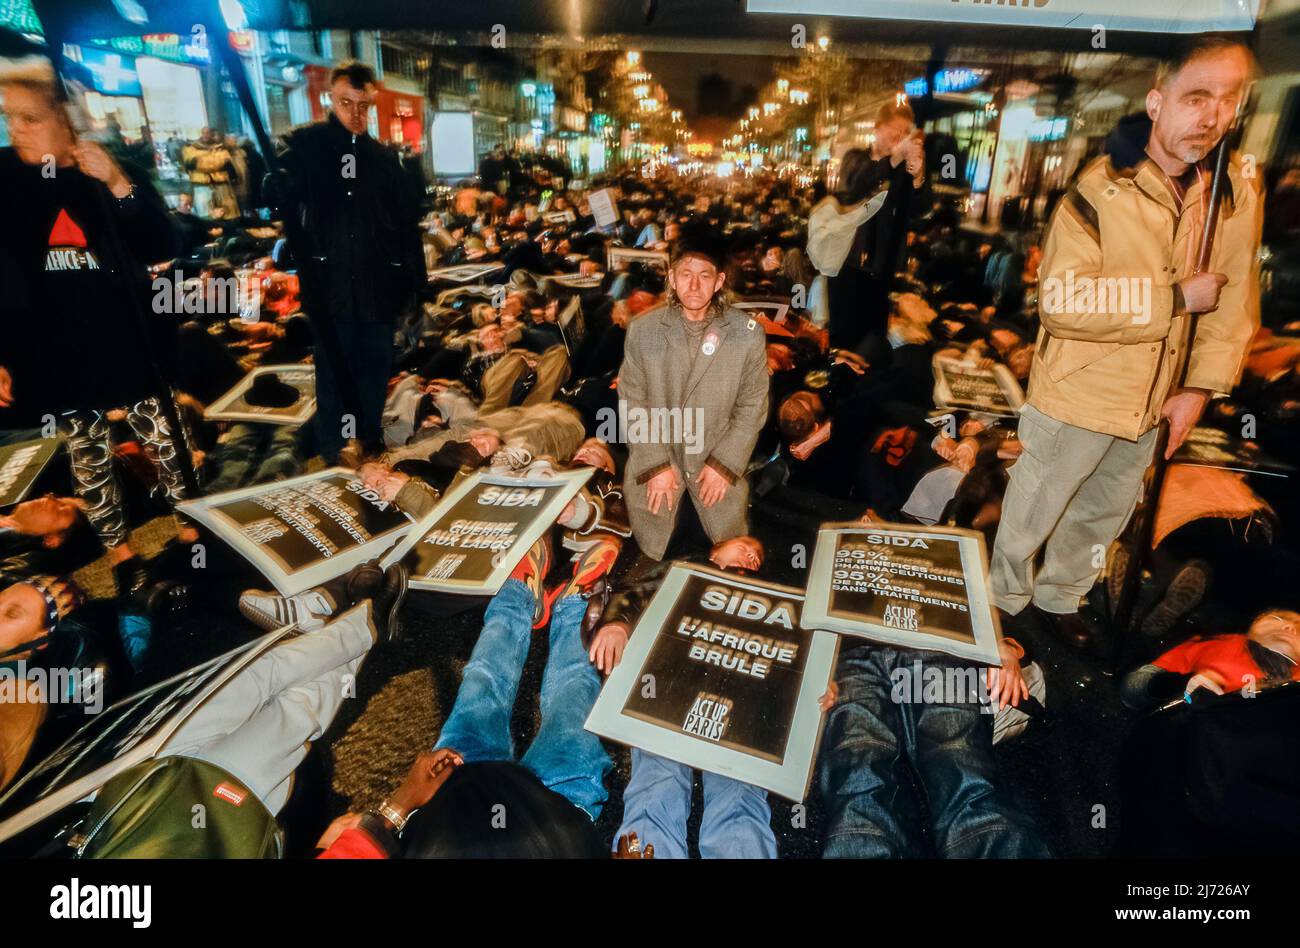 Paris, France, Large Crowd People, Aids Activists, Act Up Paris NGO Staging Die-in, Laying Down on Street in Protest of Dying, World AIDS Day, Dec. 1,  Anti Big Pharma Slogans Stock Photo